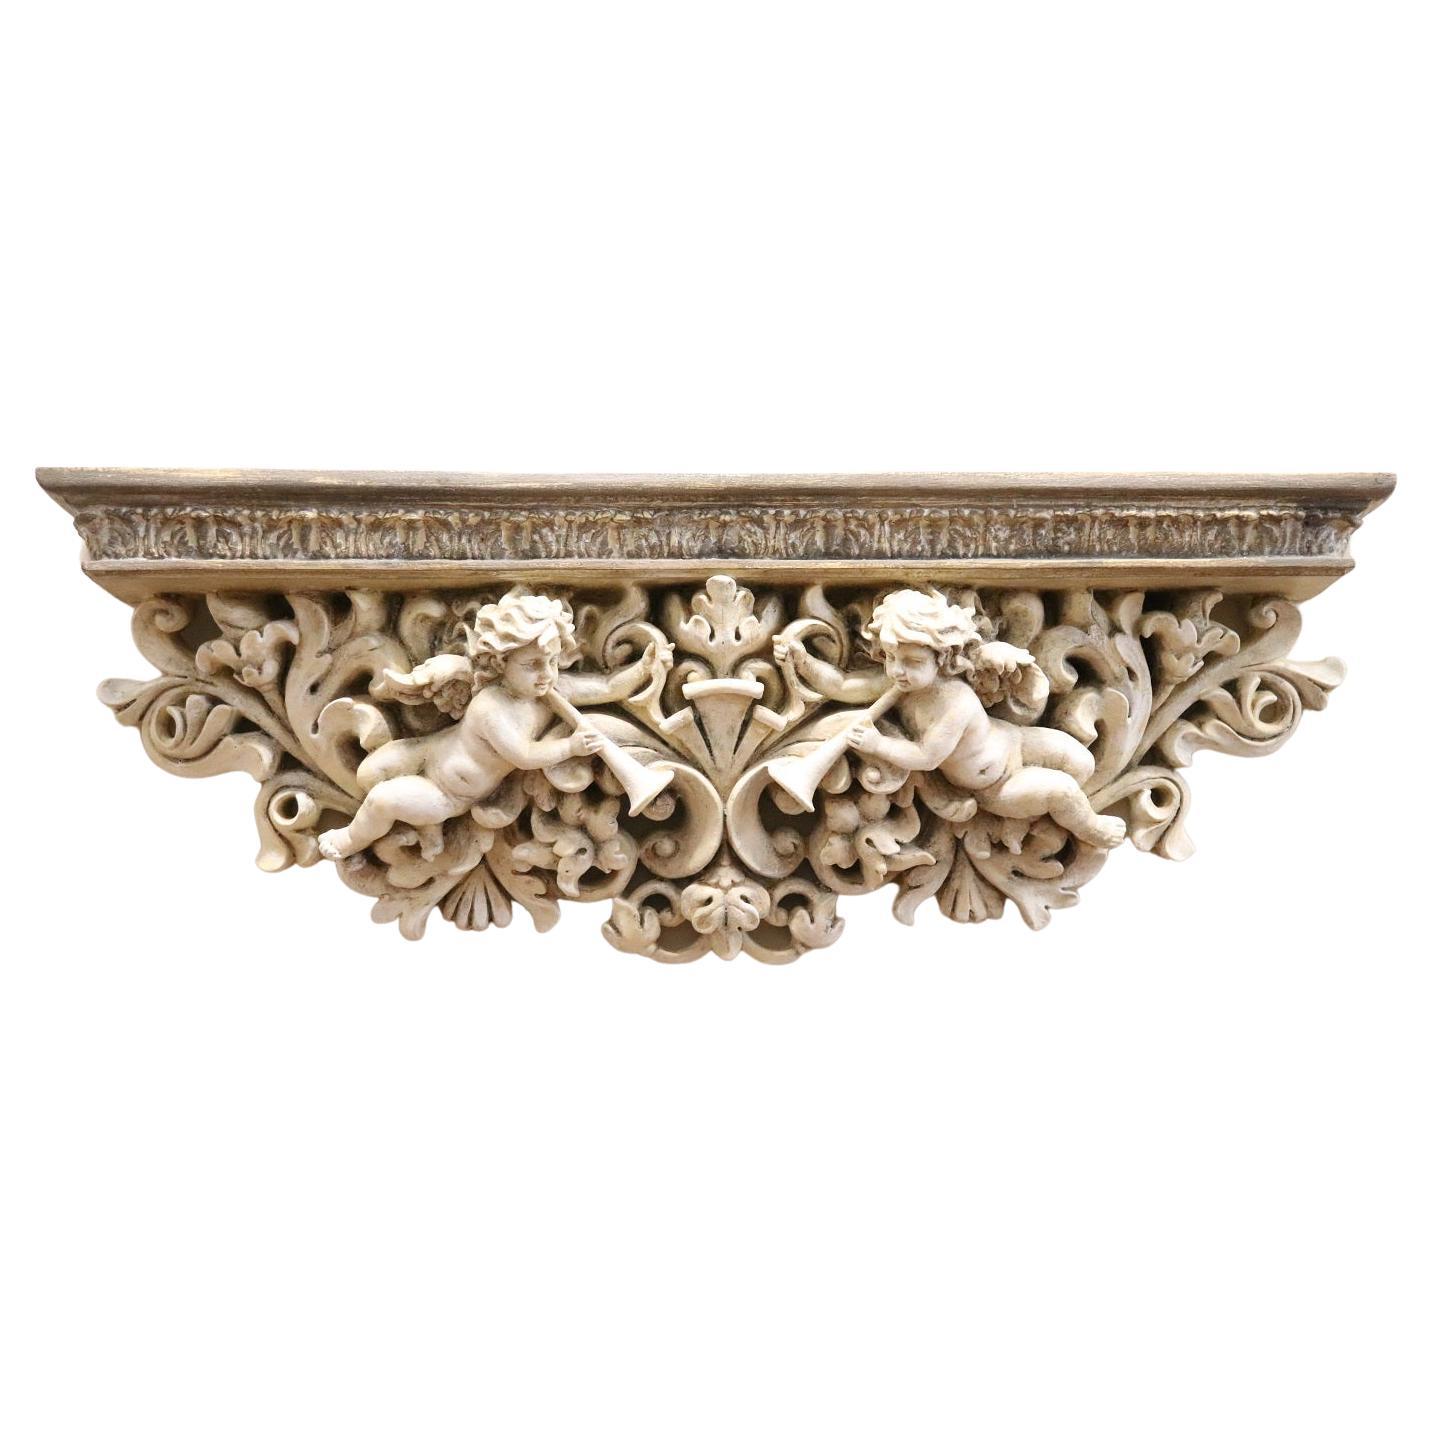 21th Century Italian Baroque Style Particular Wall Shelf For Sale